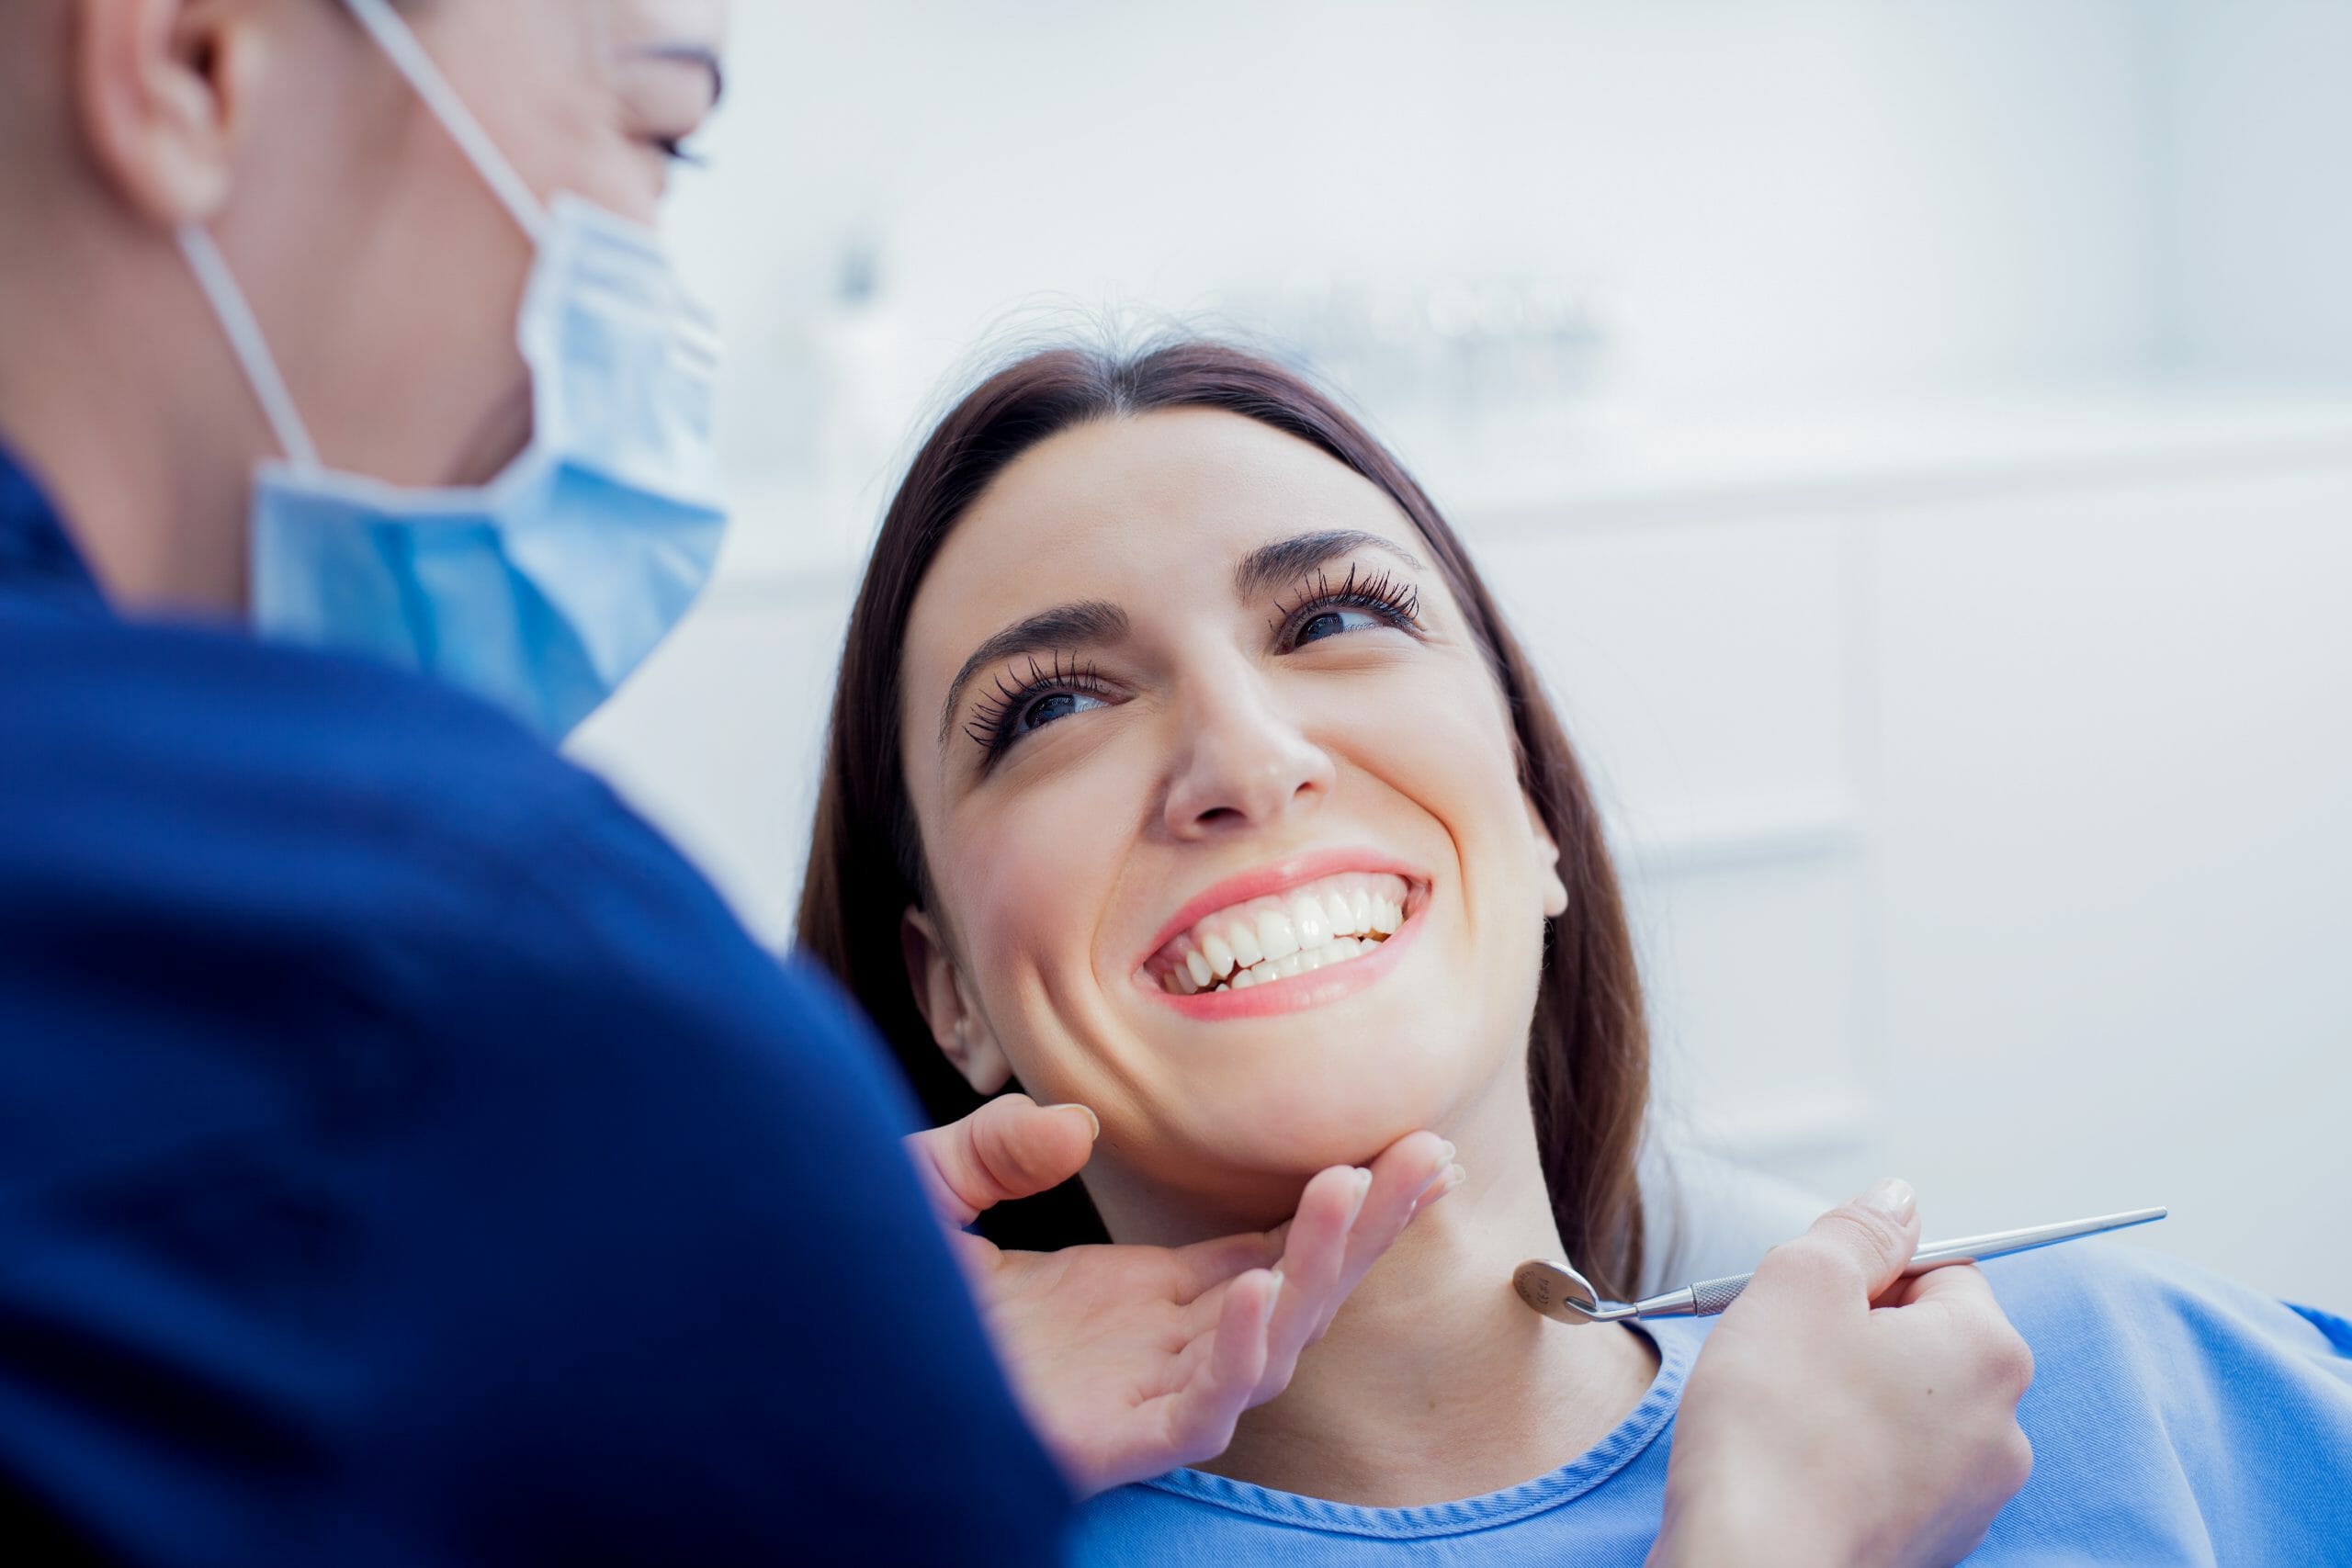 Dentist working on smiling patient with mirror in hand